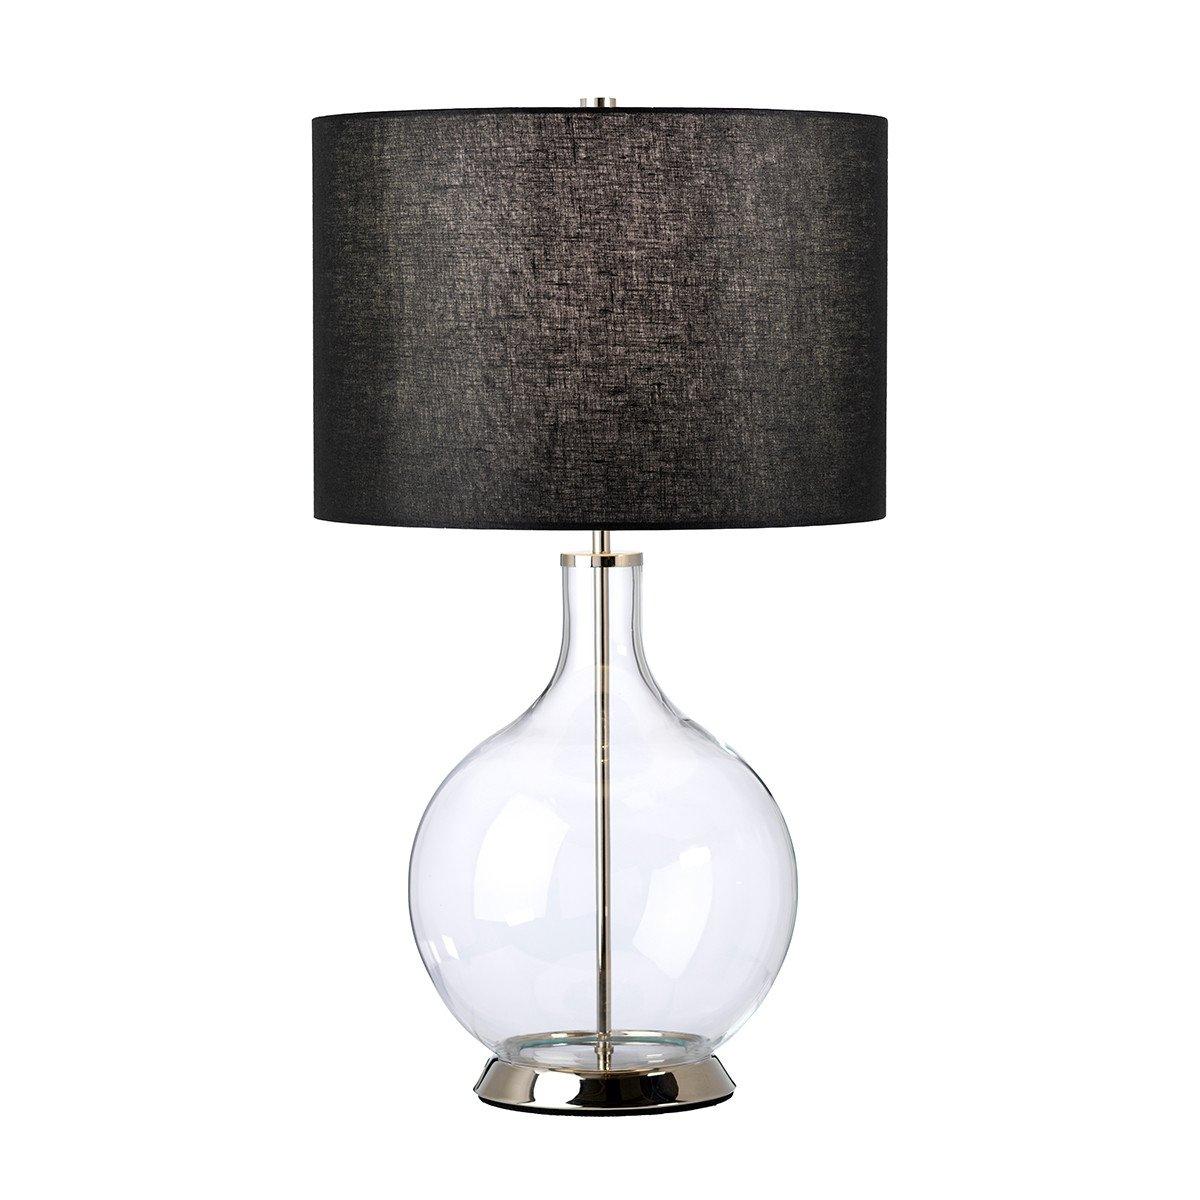 Orb Table Lamp with Round Shade Polished Nickel